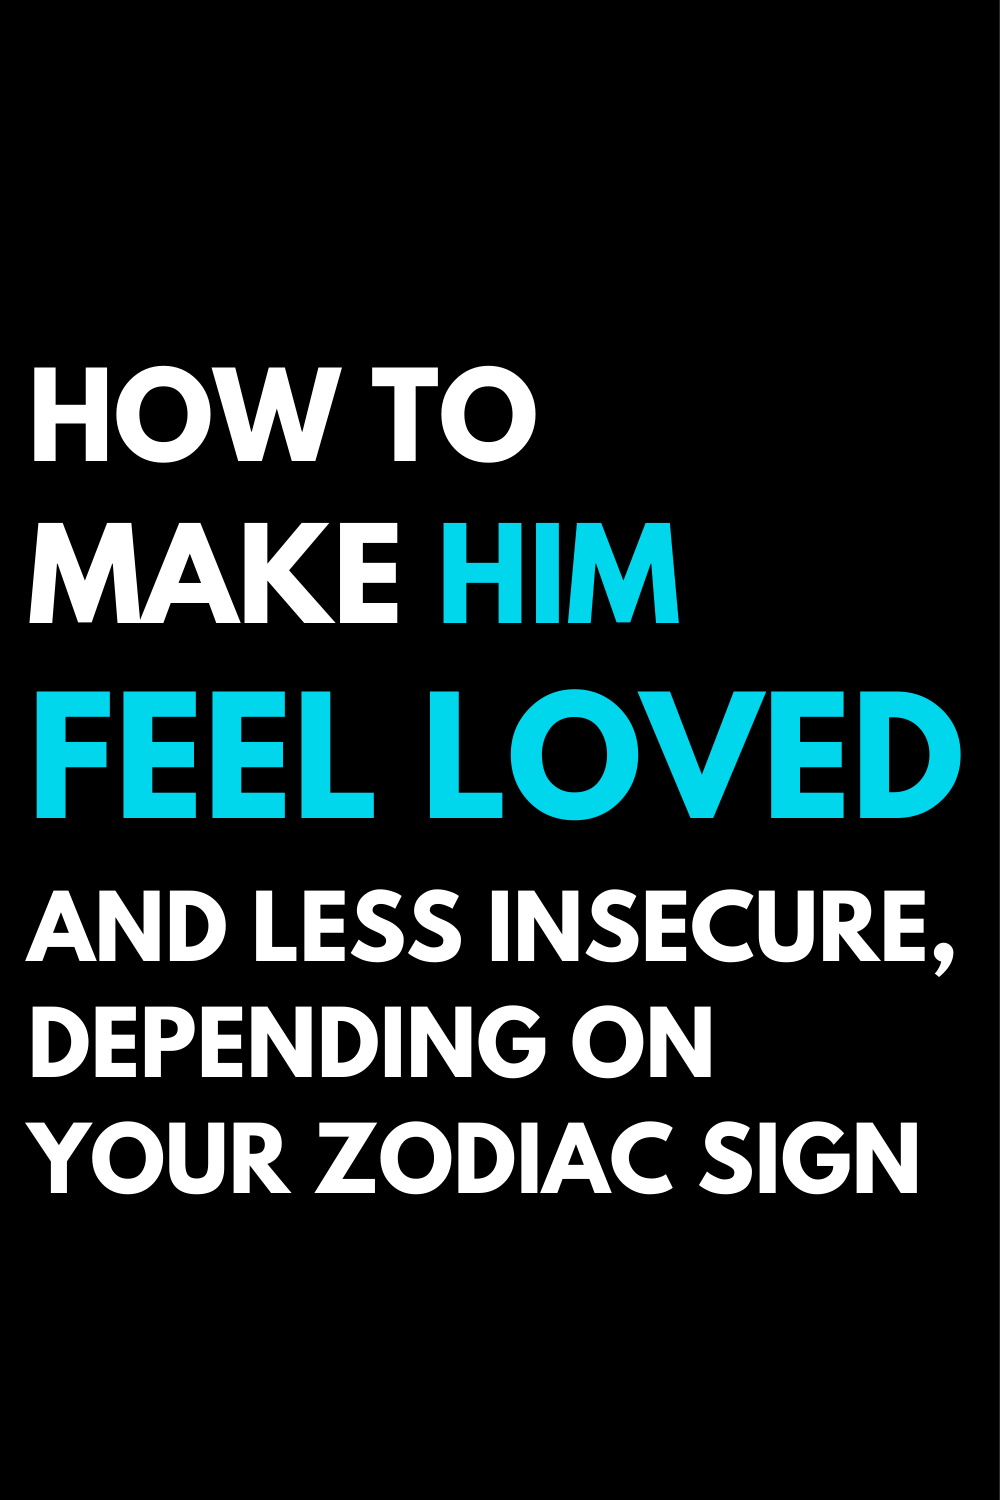 How to make him feel loved and less insecure, depending on your zodiac sign